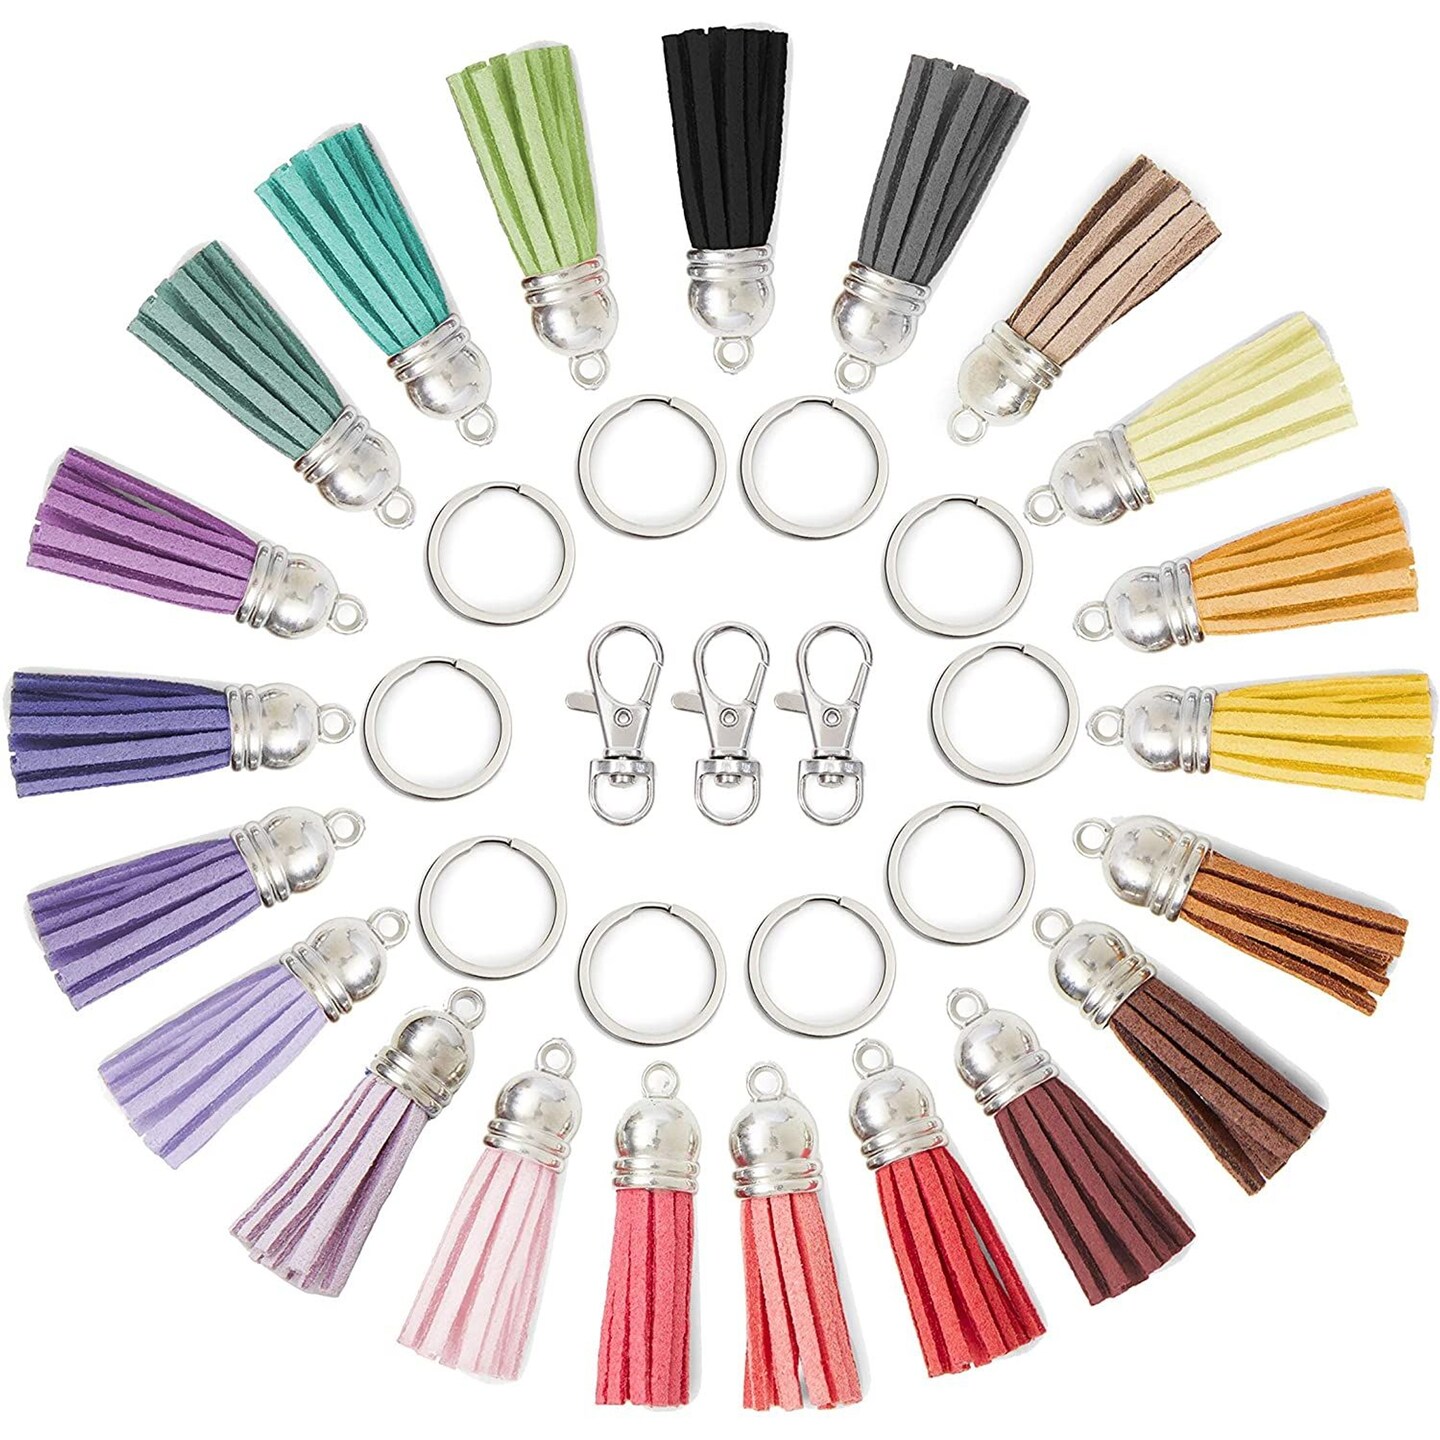 Detachable Key Chains with Quick Release Snaplock, Dual Sided